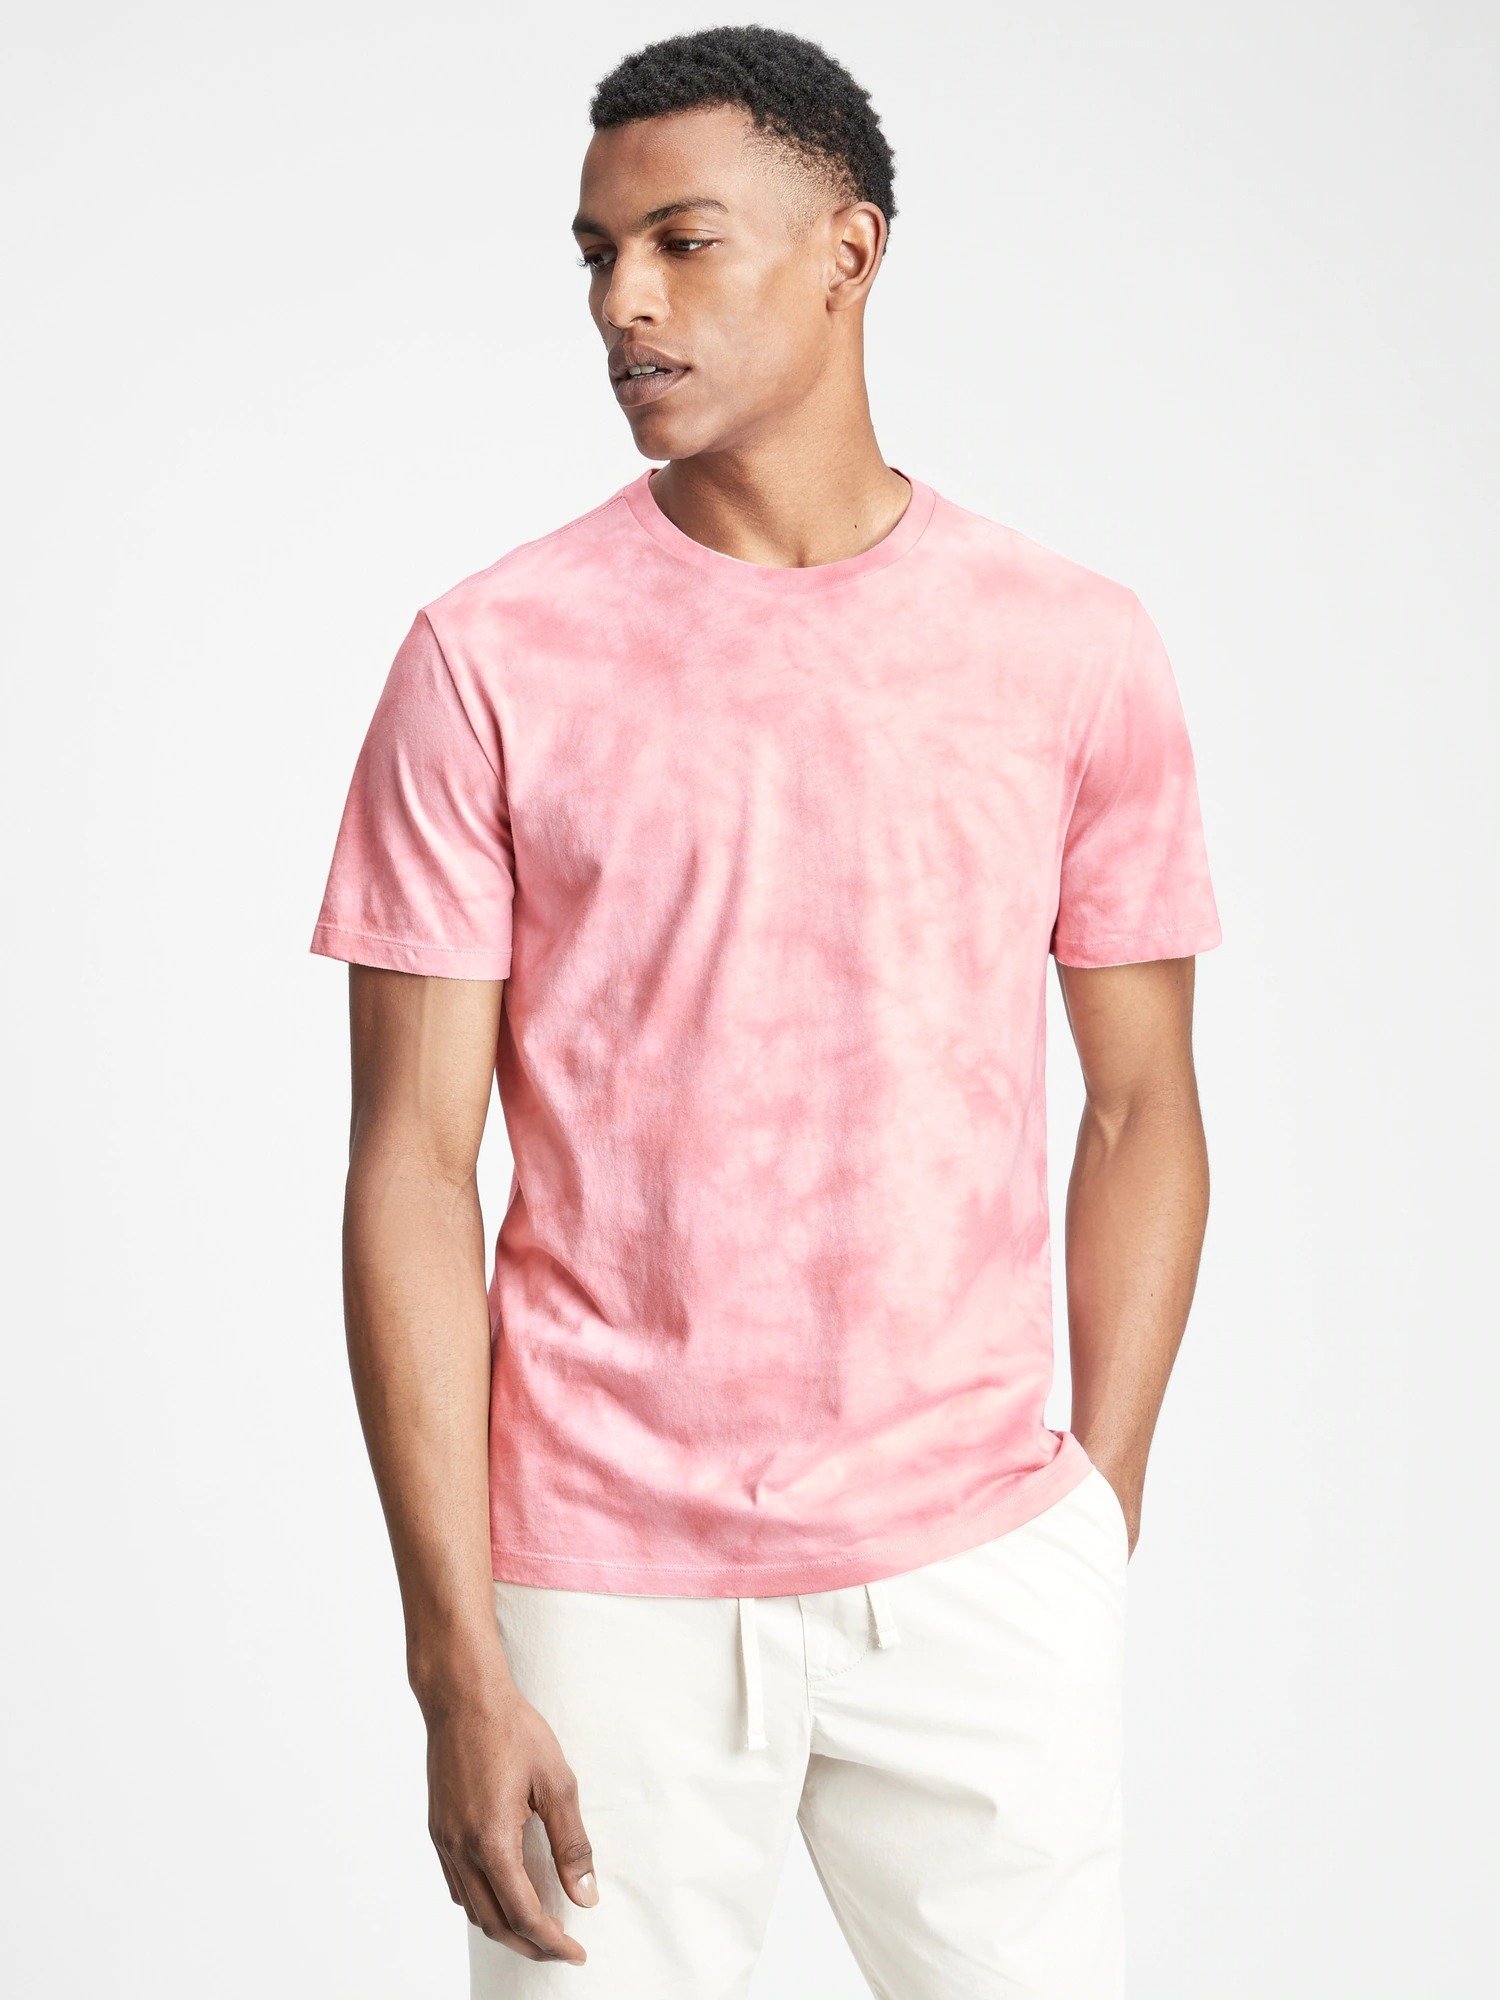 Tie-Dye T-Shirt product image